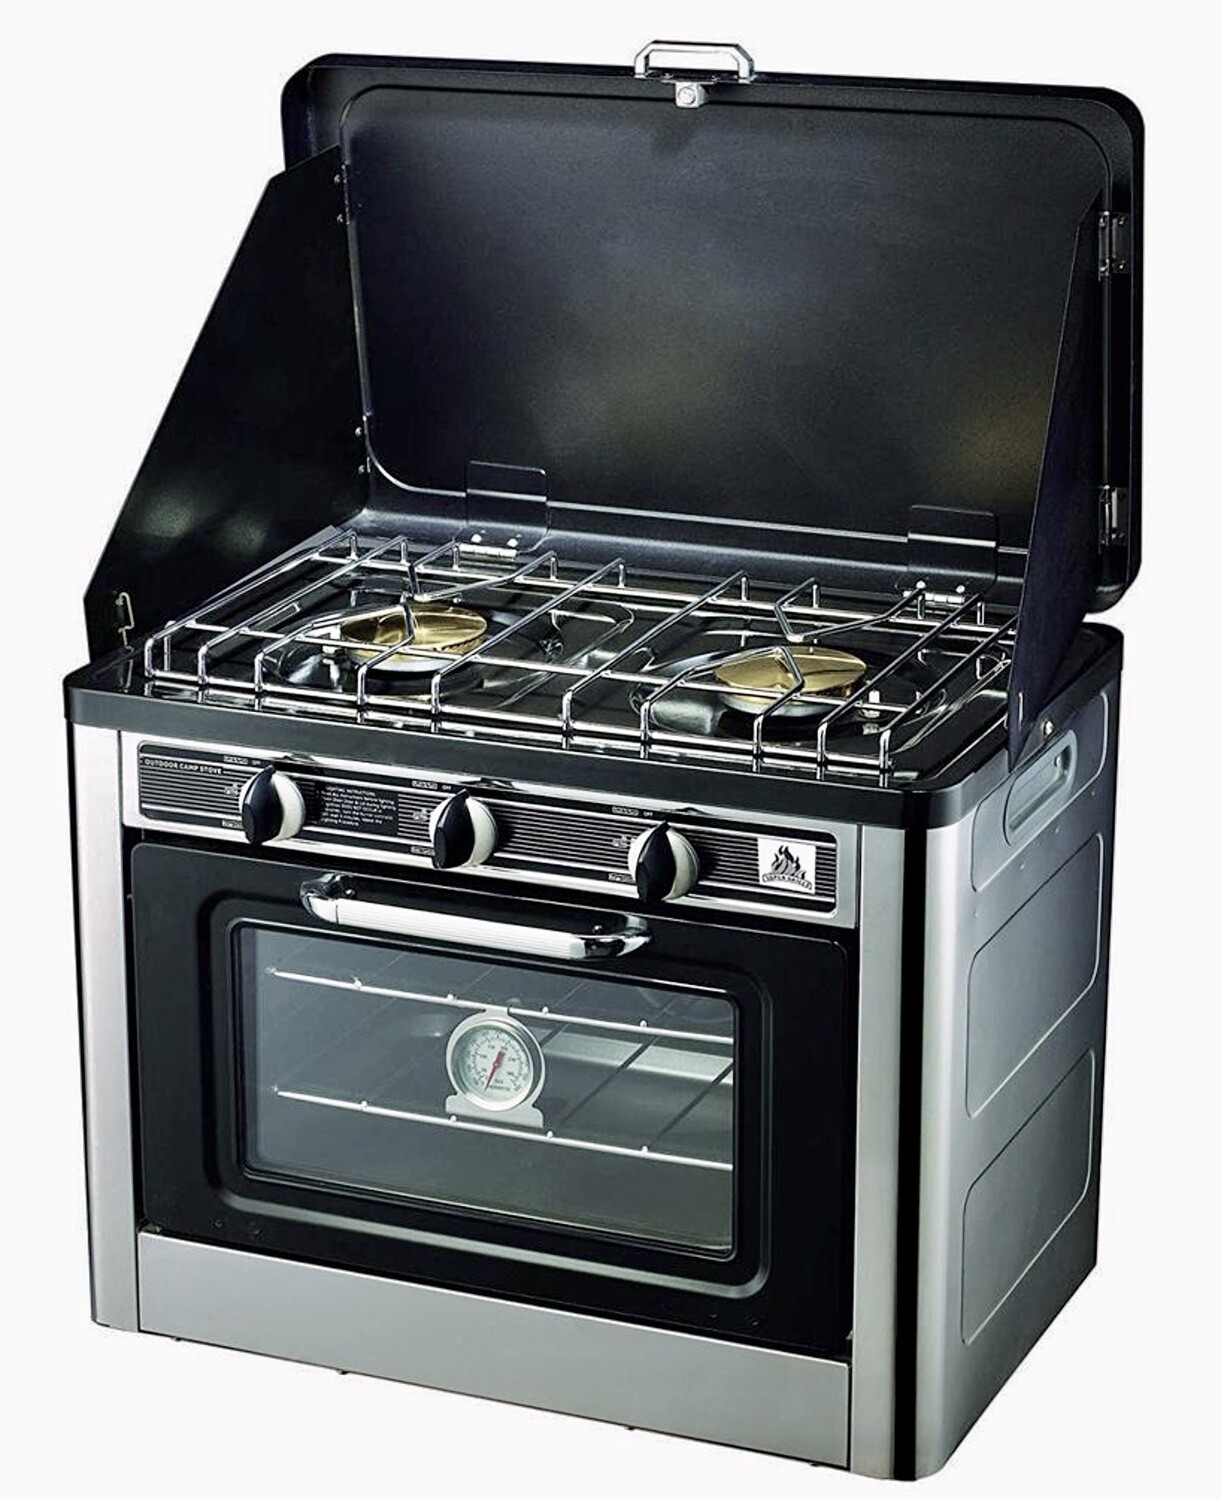 Super grills Camping Gas Oven Portable Stainless Steel